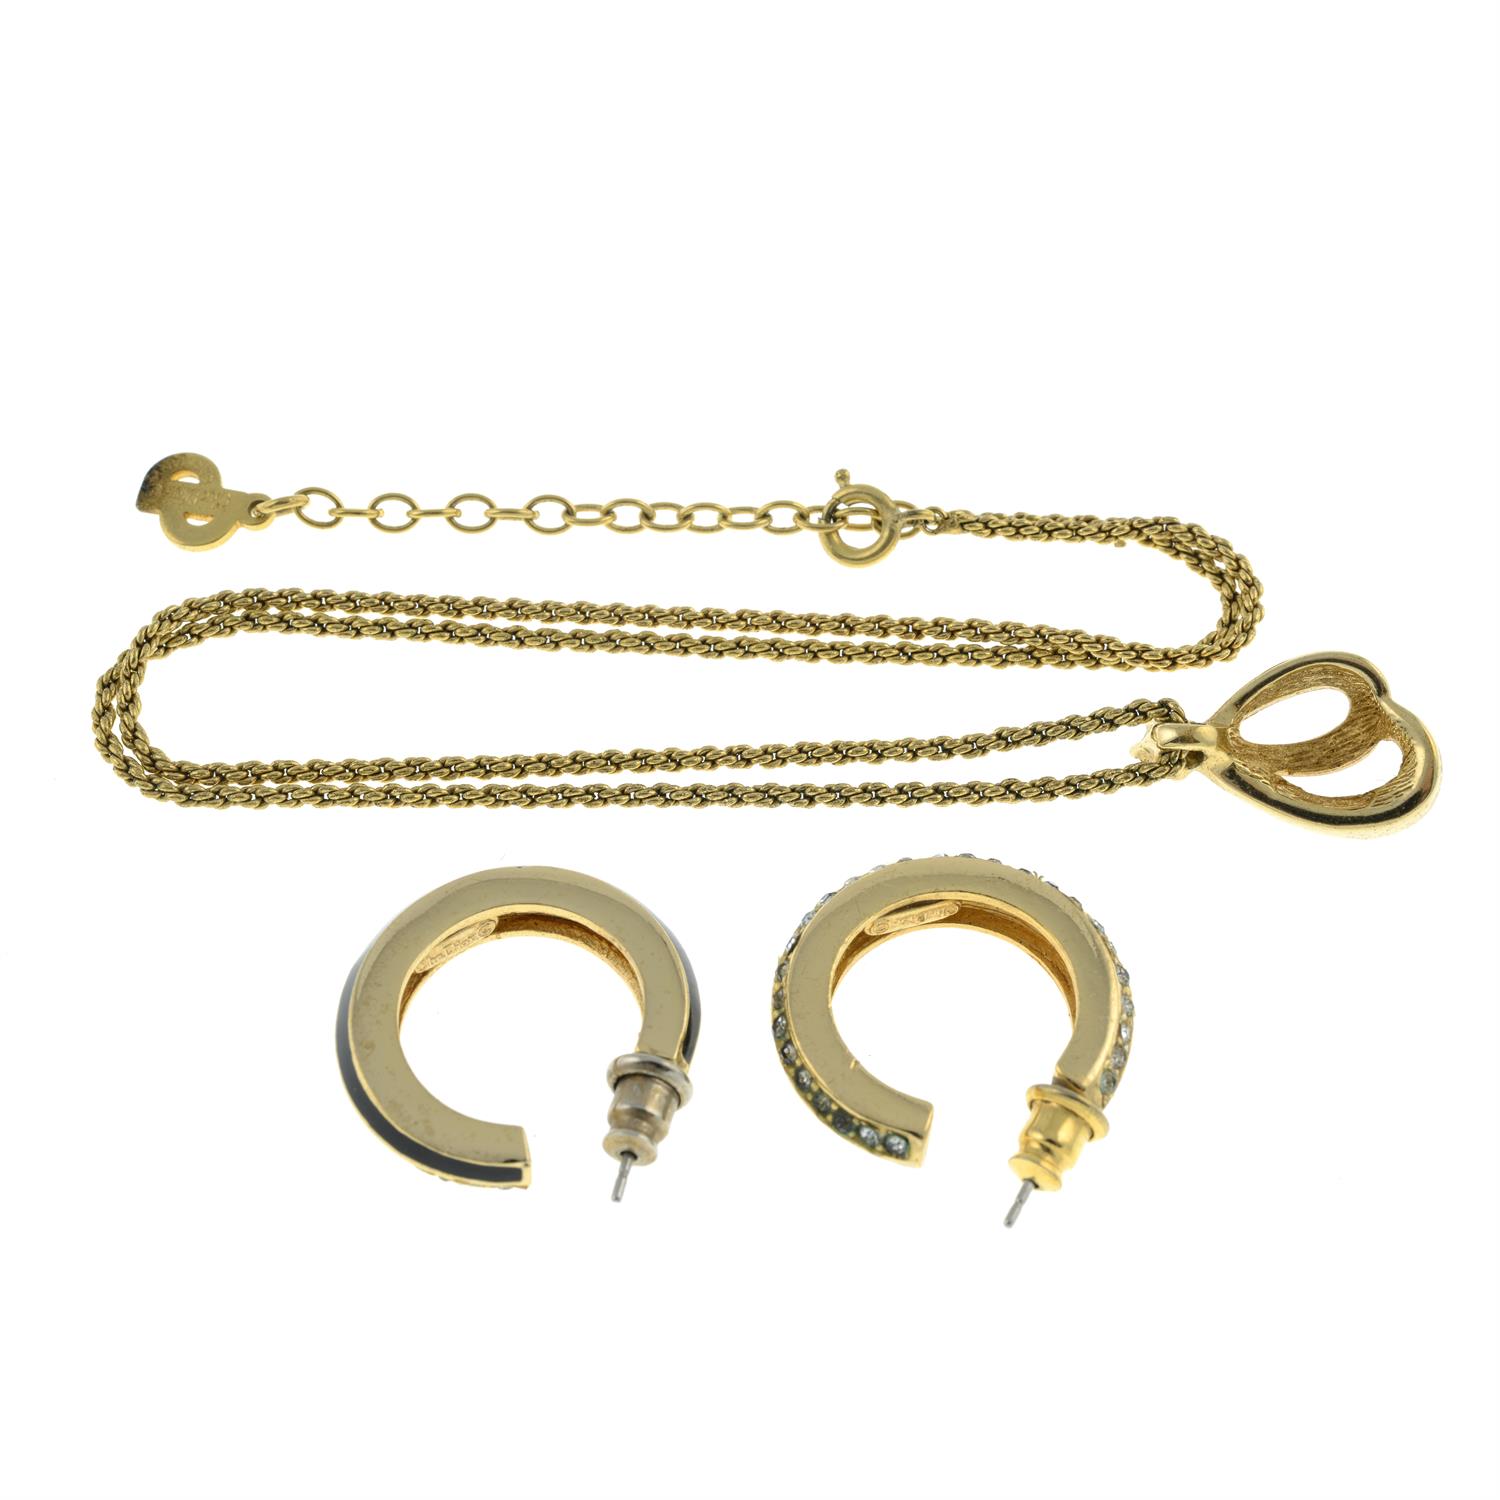 Christian Dior - earrings and necklace set. - Image 2 of 2